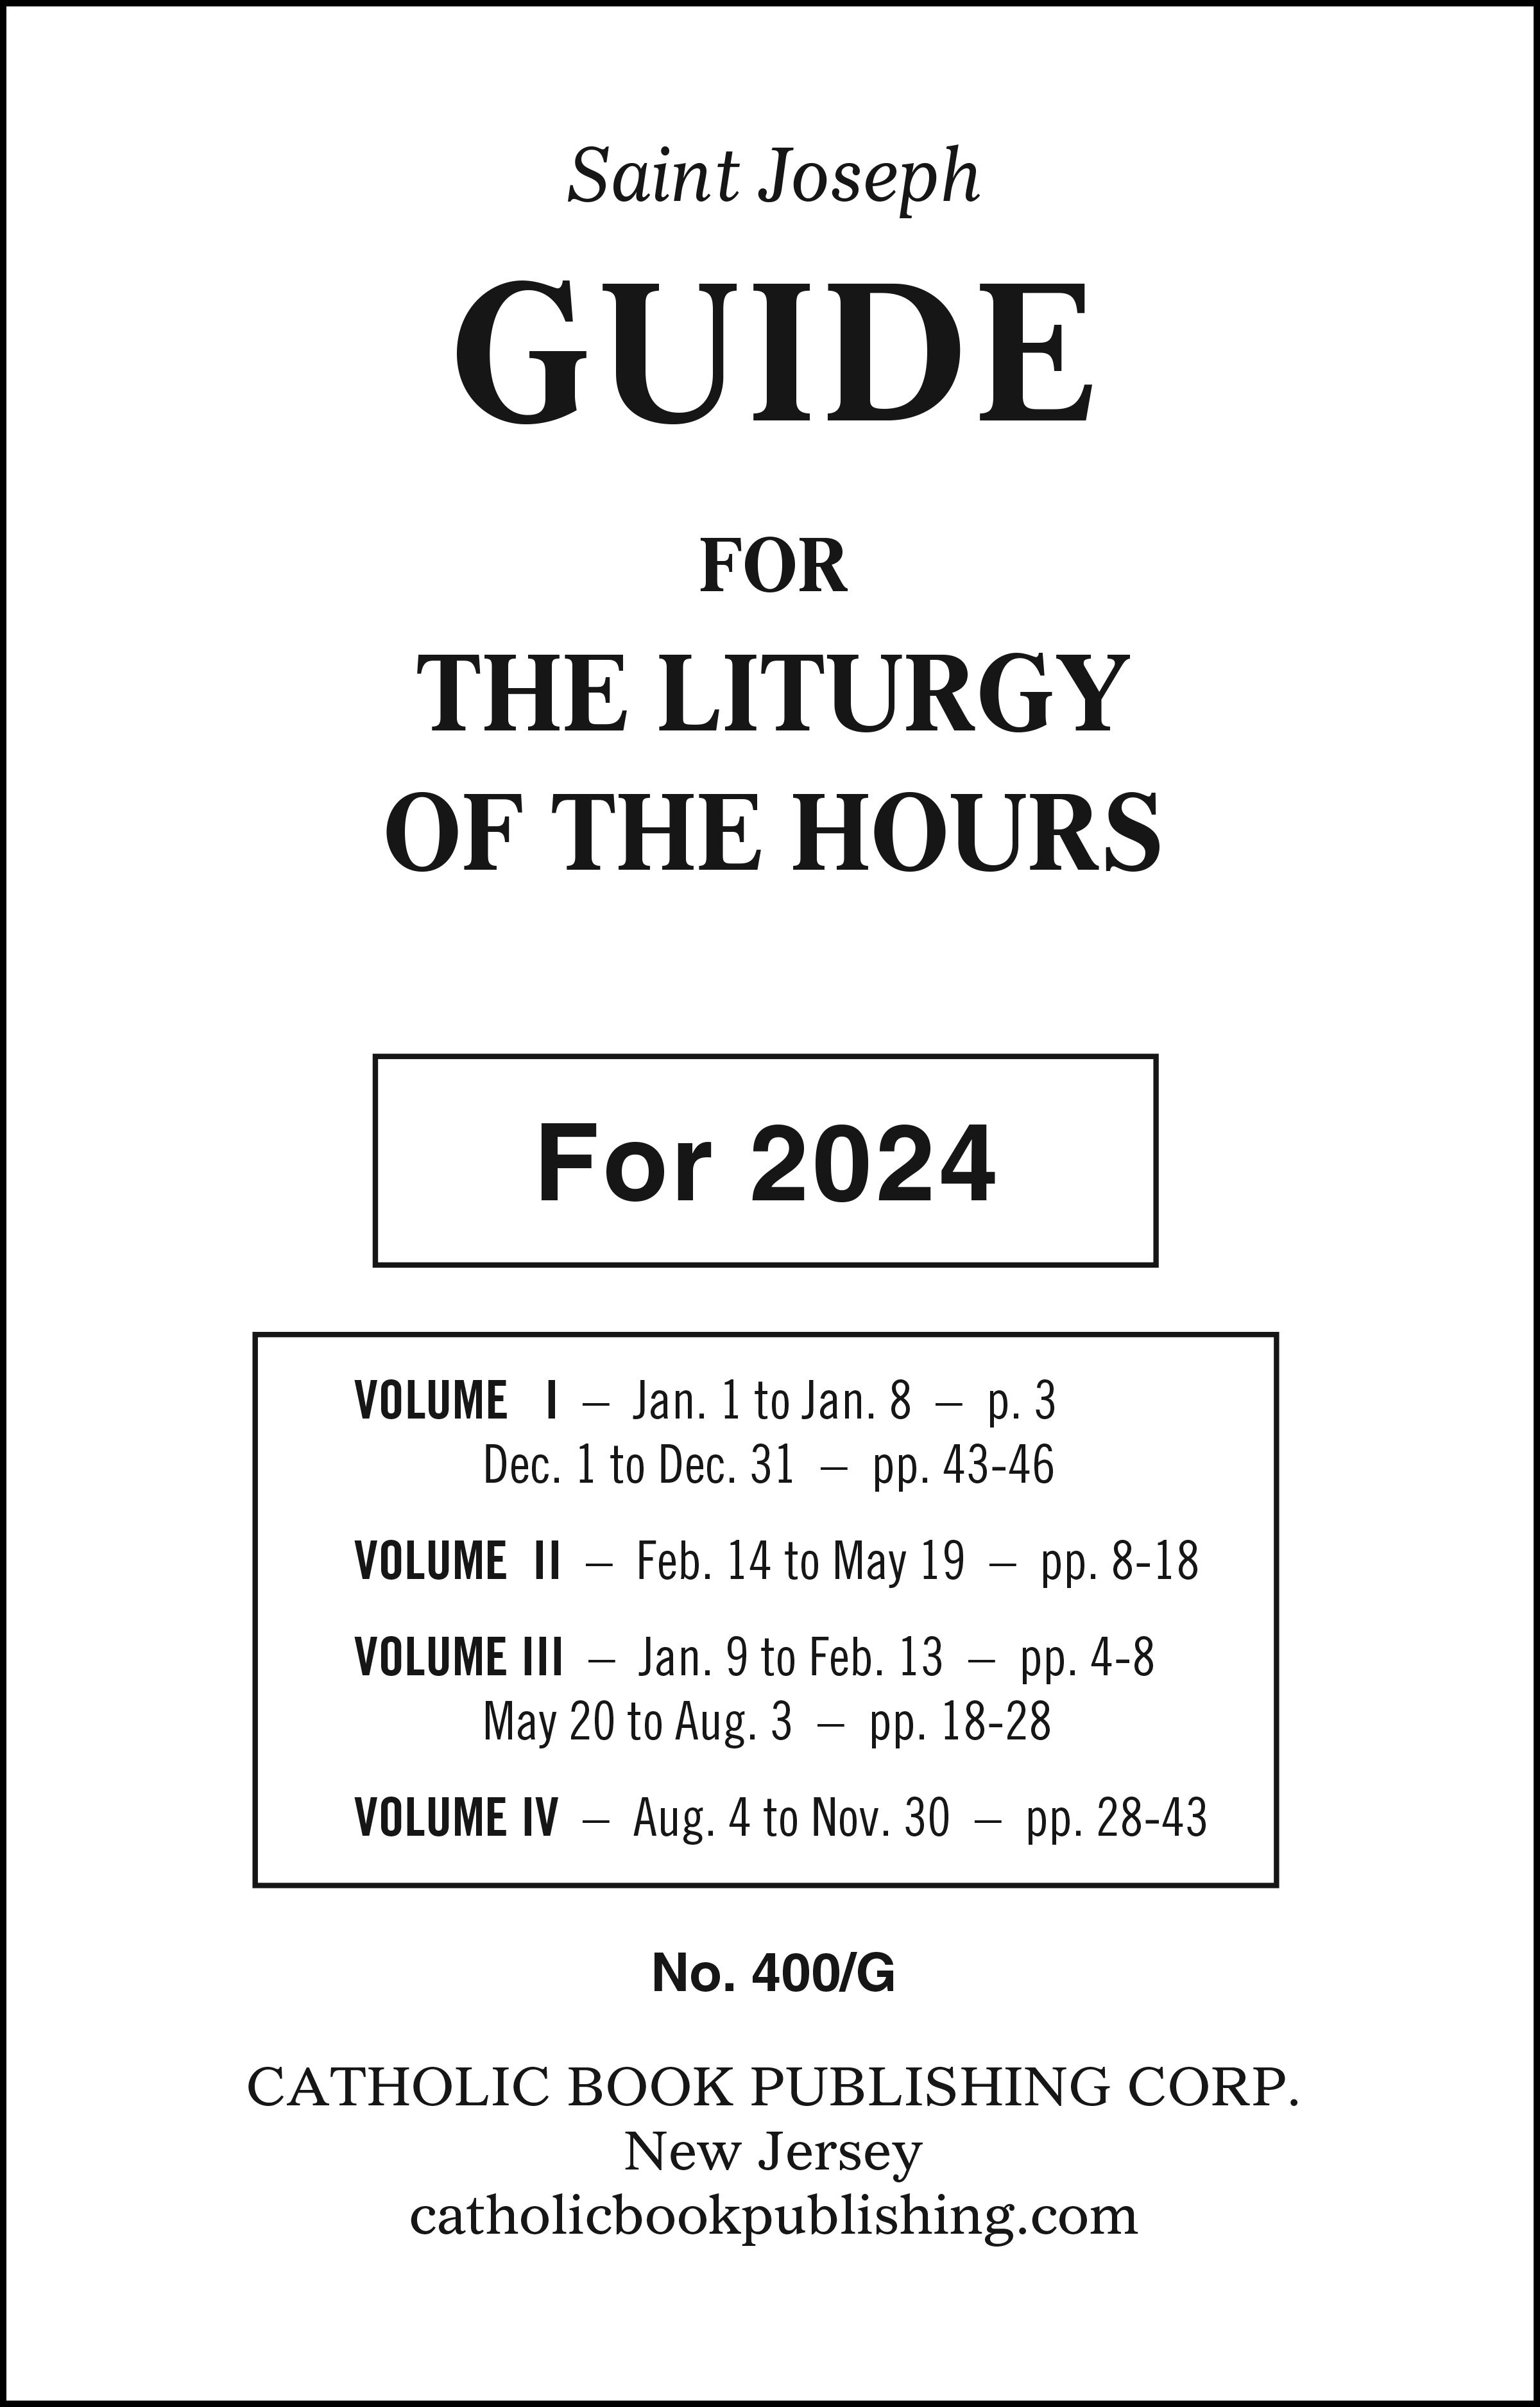 Liturgy Of The Hours Guide For 2024